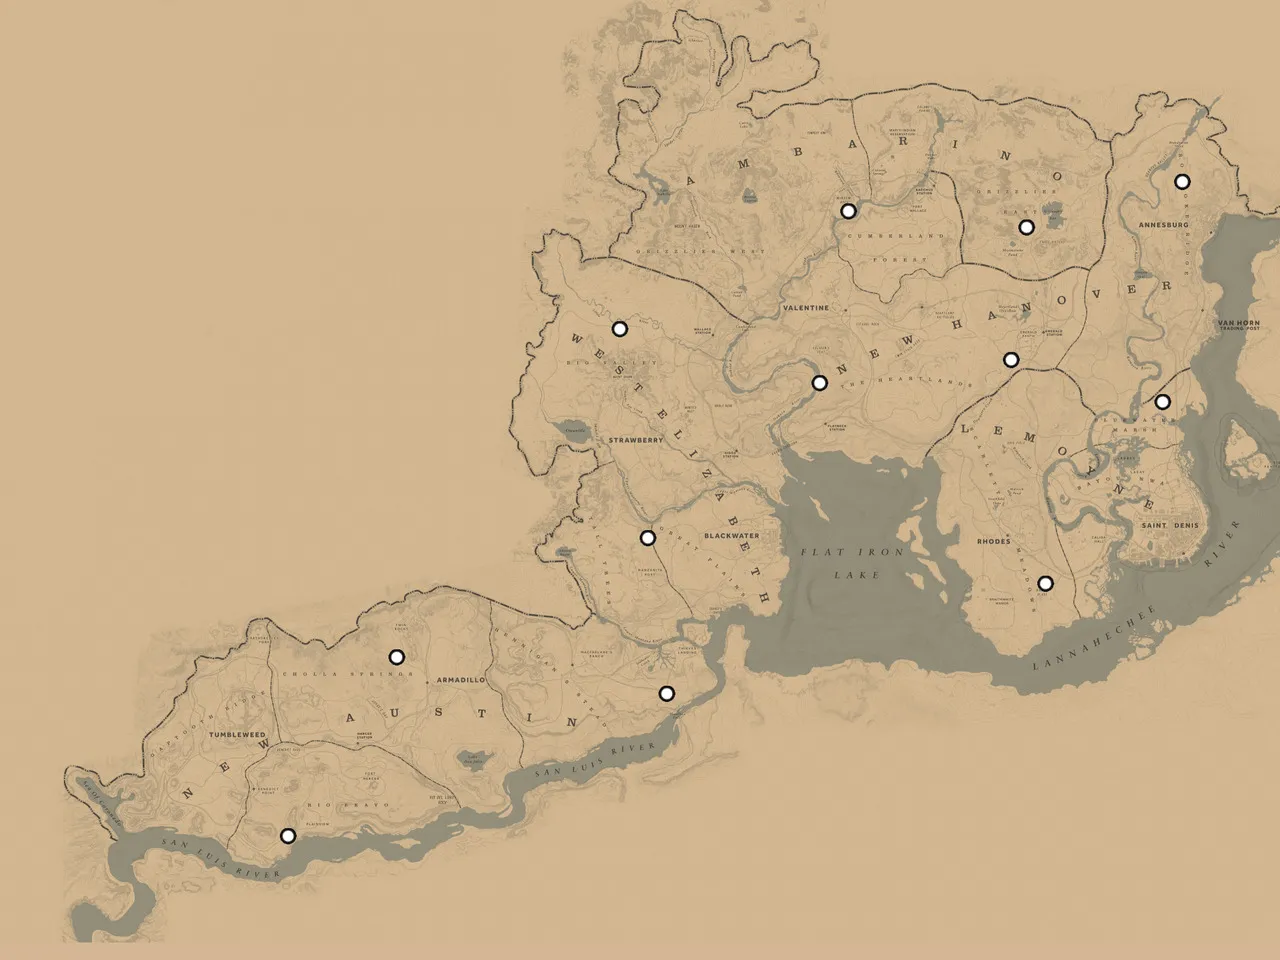 images/red-dead-redemption-2/articles/red-dead-online-madam-nazar-position-map.png